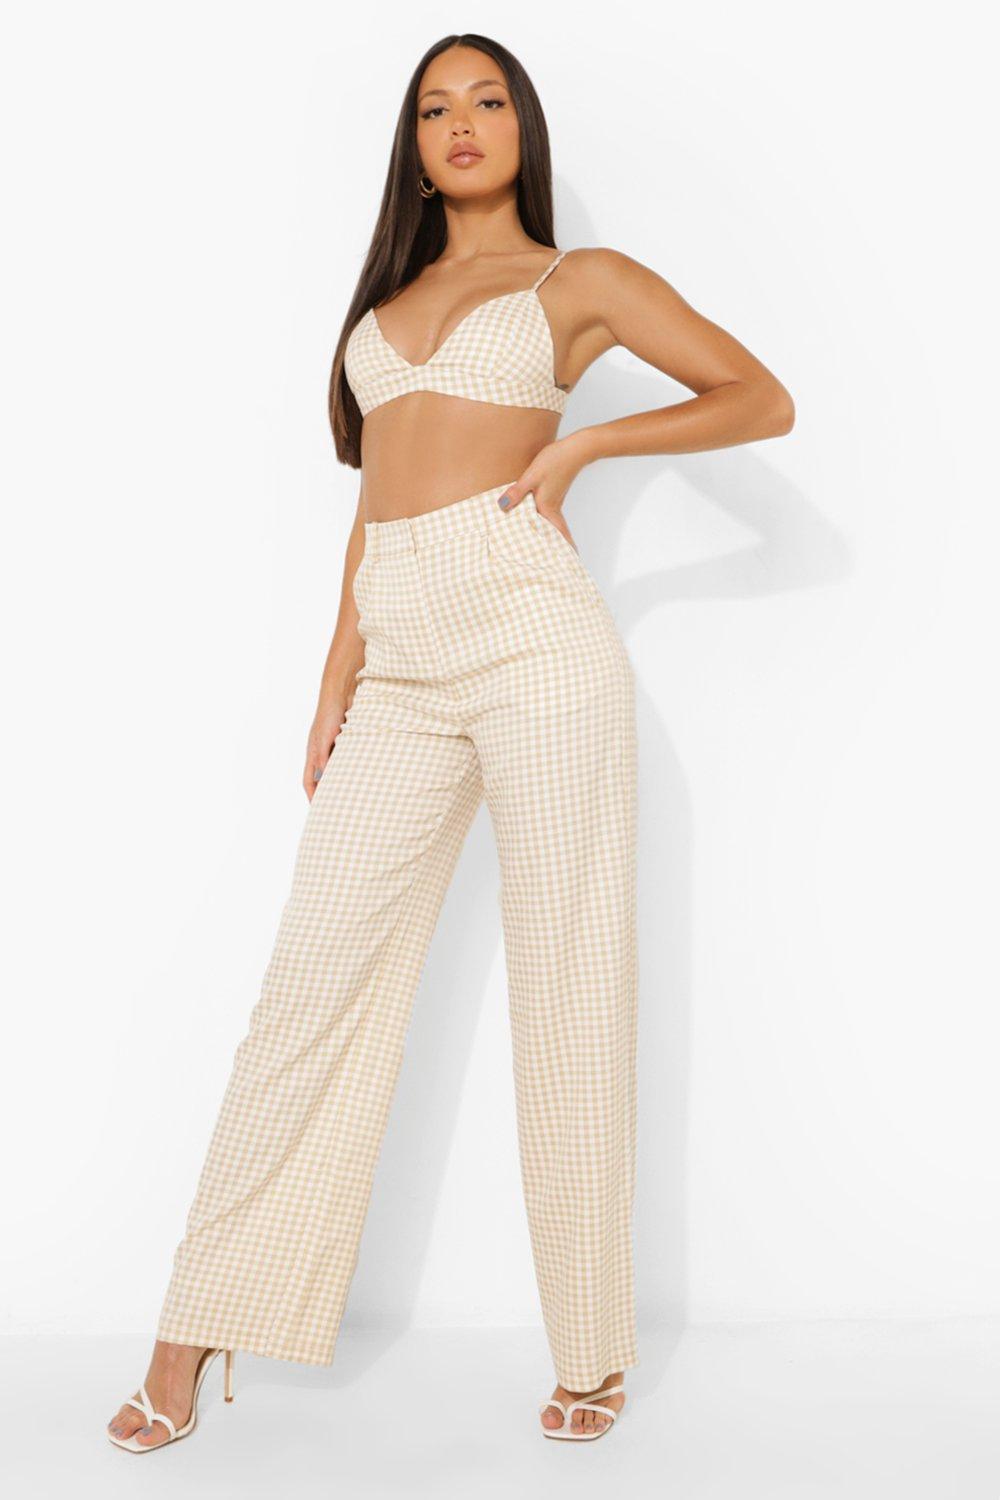 Black and White Stripe Crop Top and Trousers Co-ord Set - Kimmy